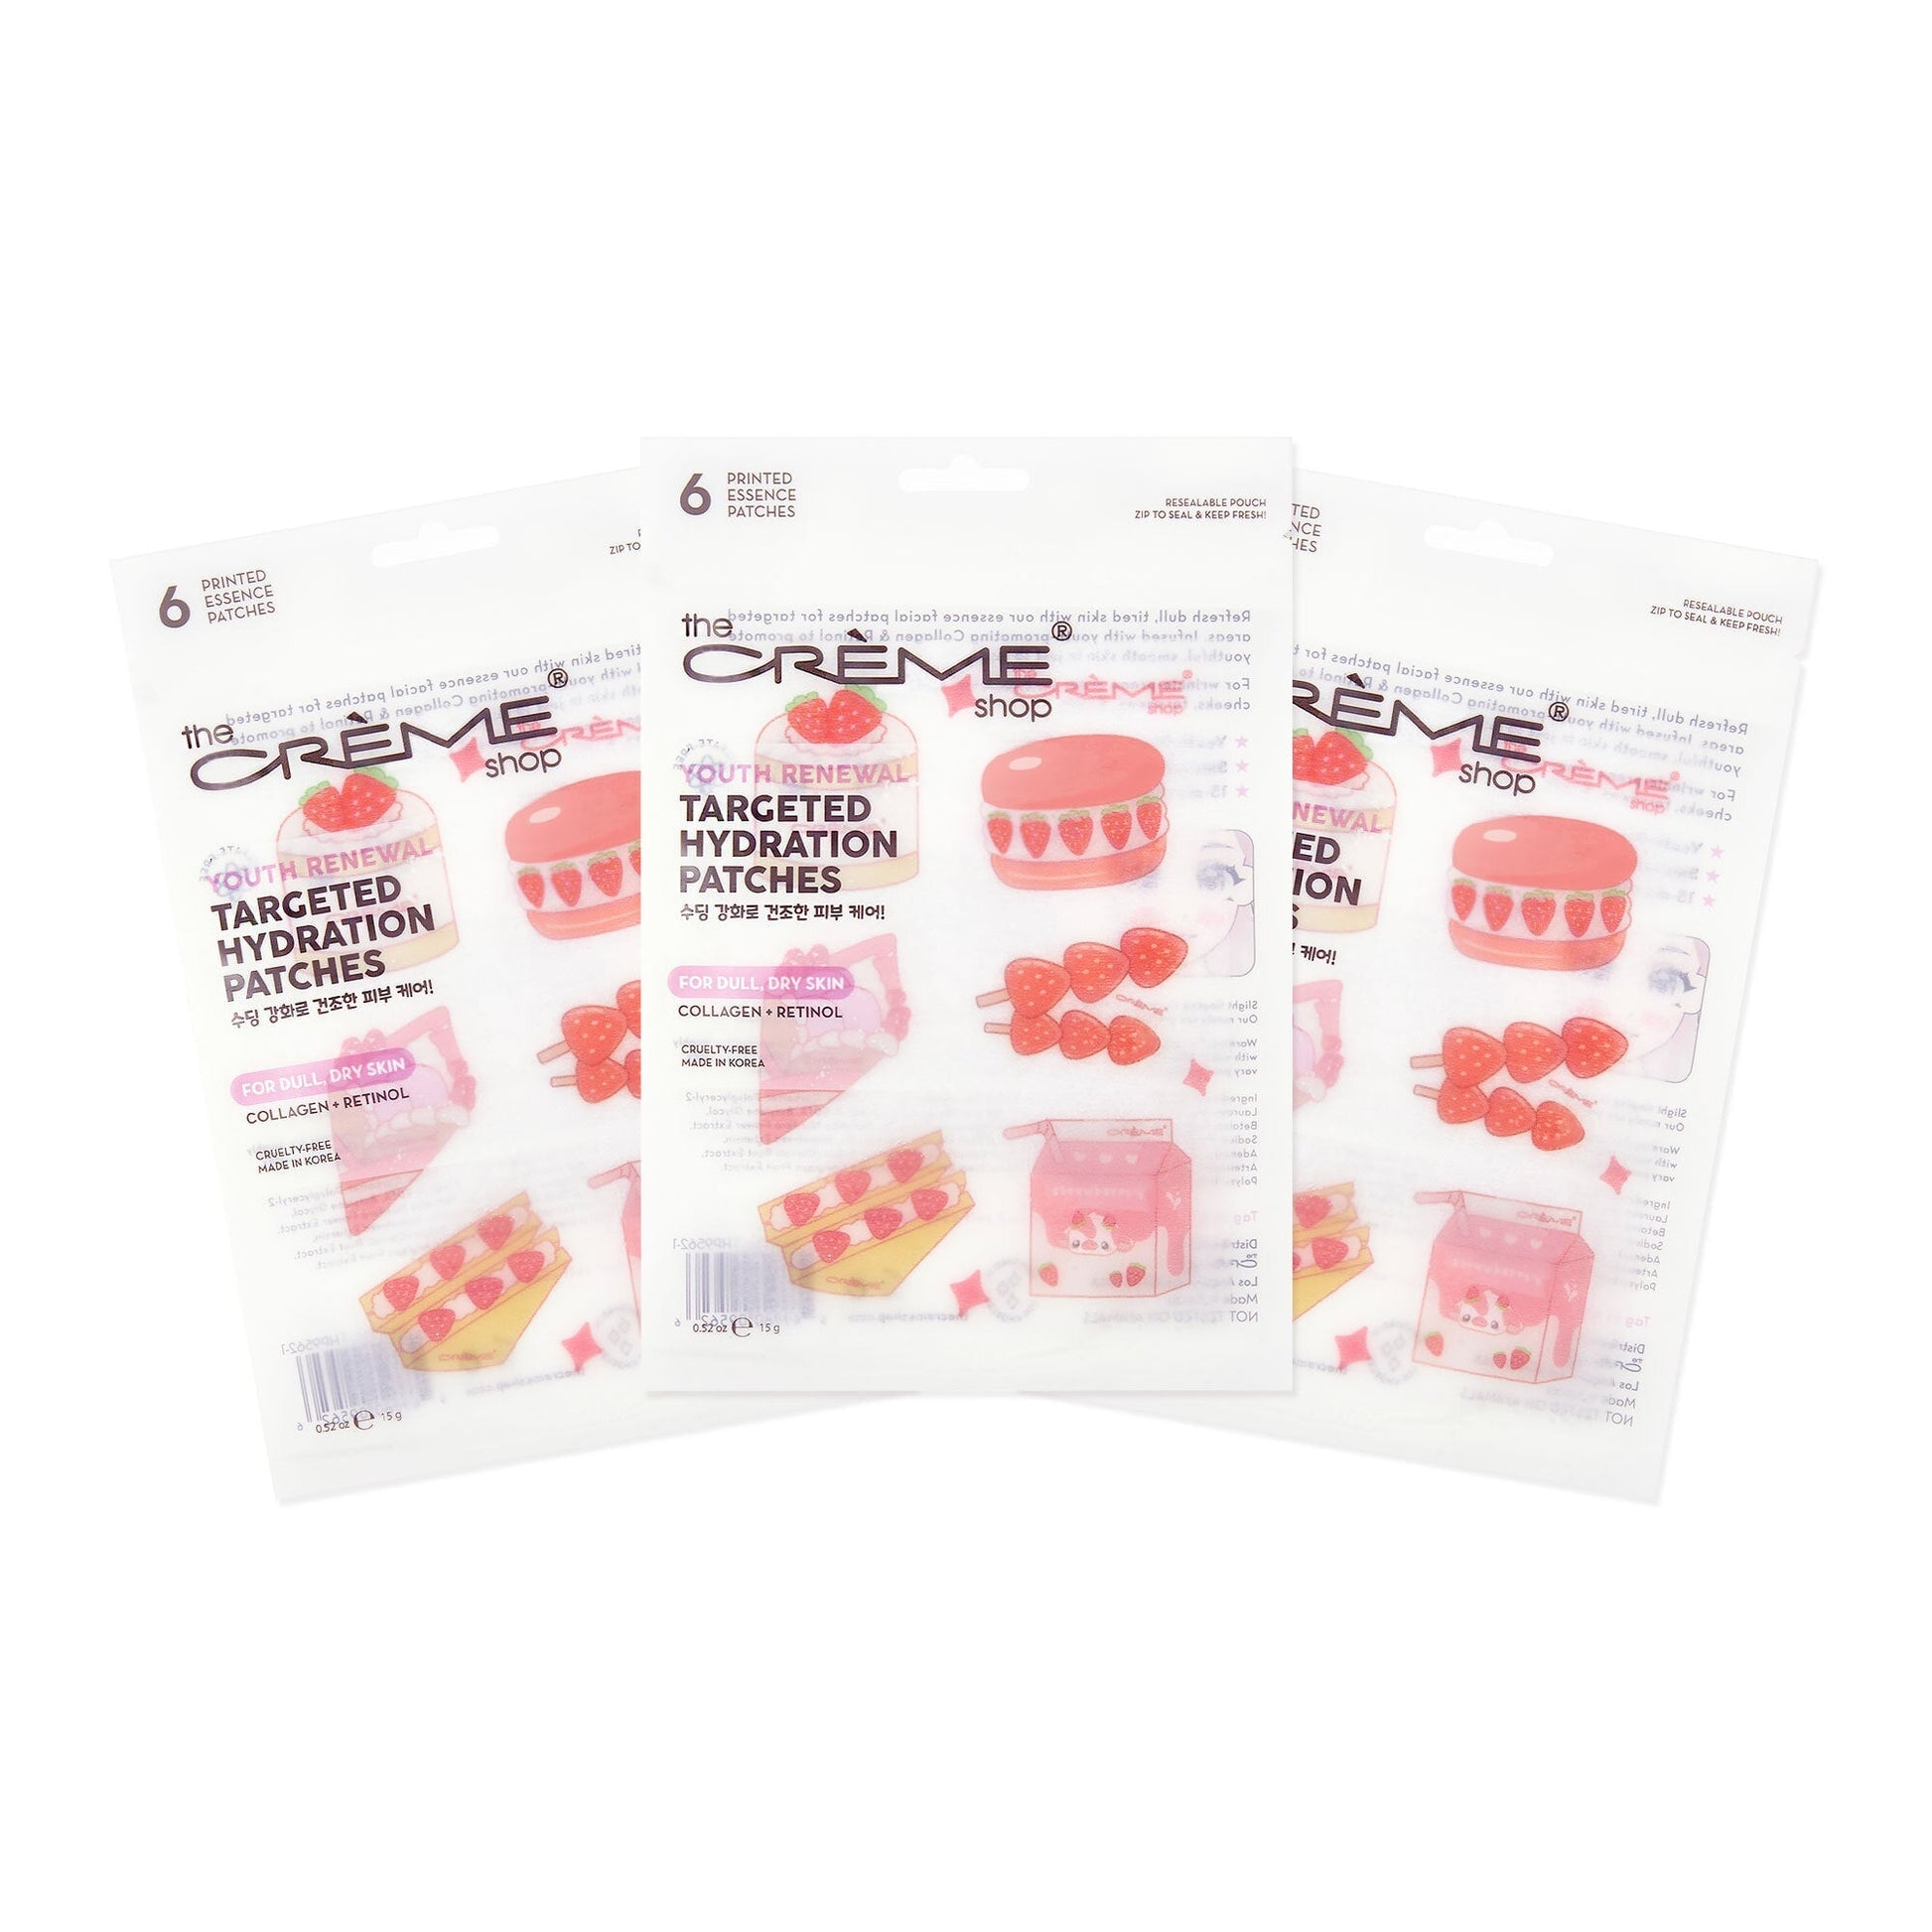 Targeted Hydration Patches For Dry Skin - "Strawberry Delights" (3 Pack) Patches The Crème Shop 